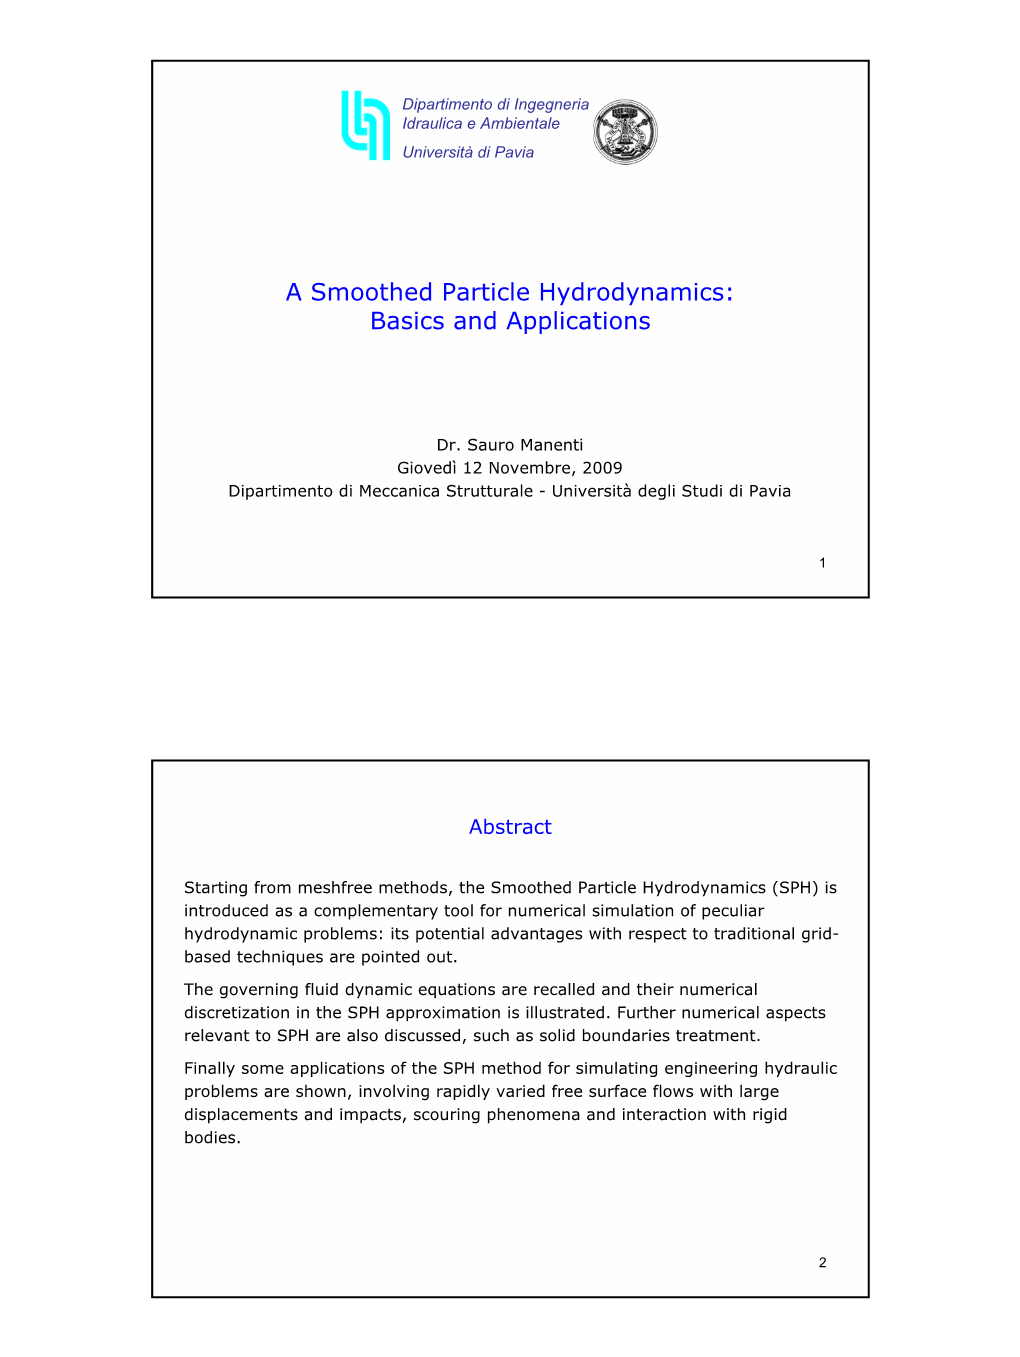 A Smoothed Particle Hydrodynamics: Basics and Applications